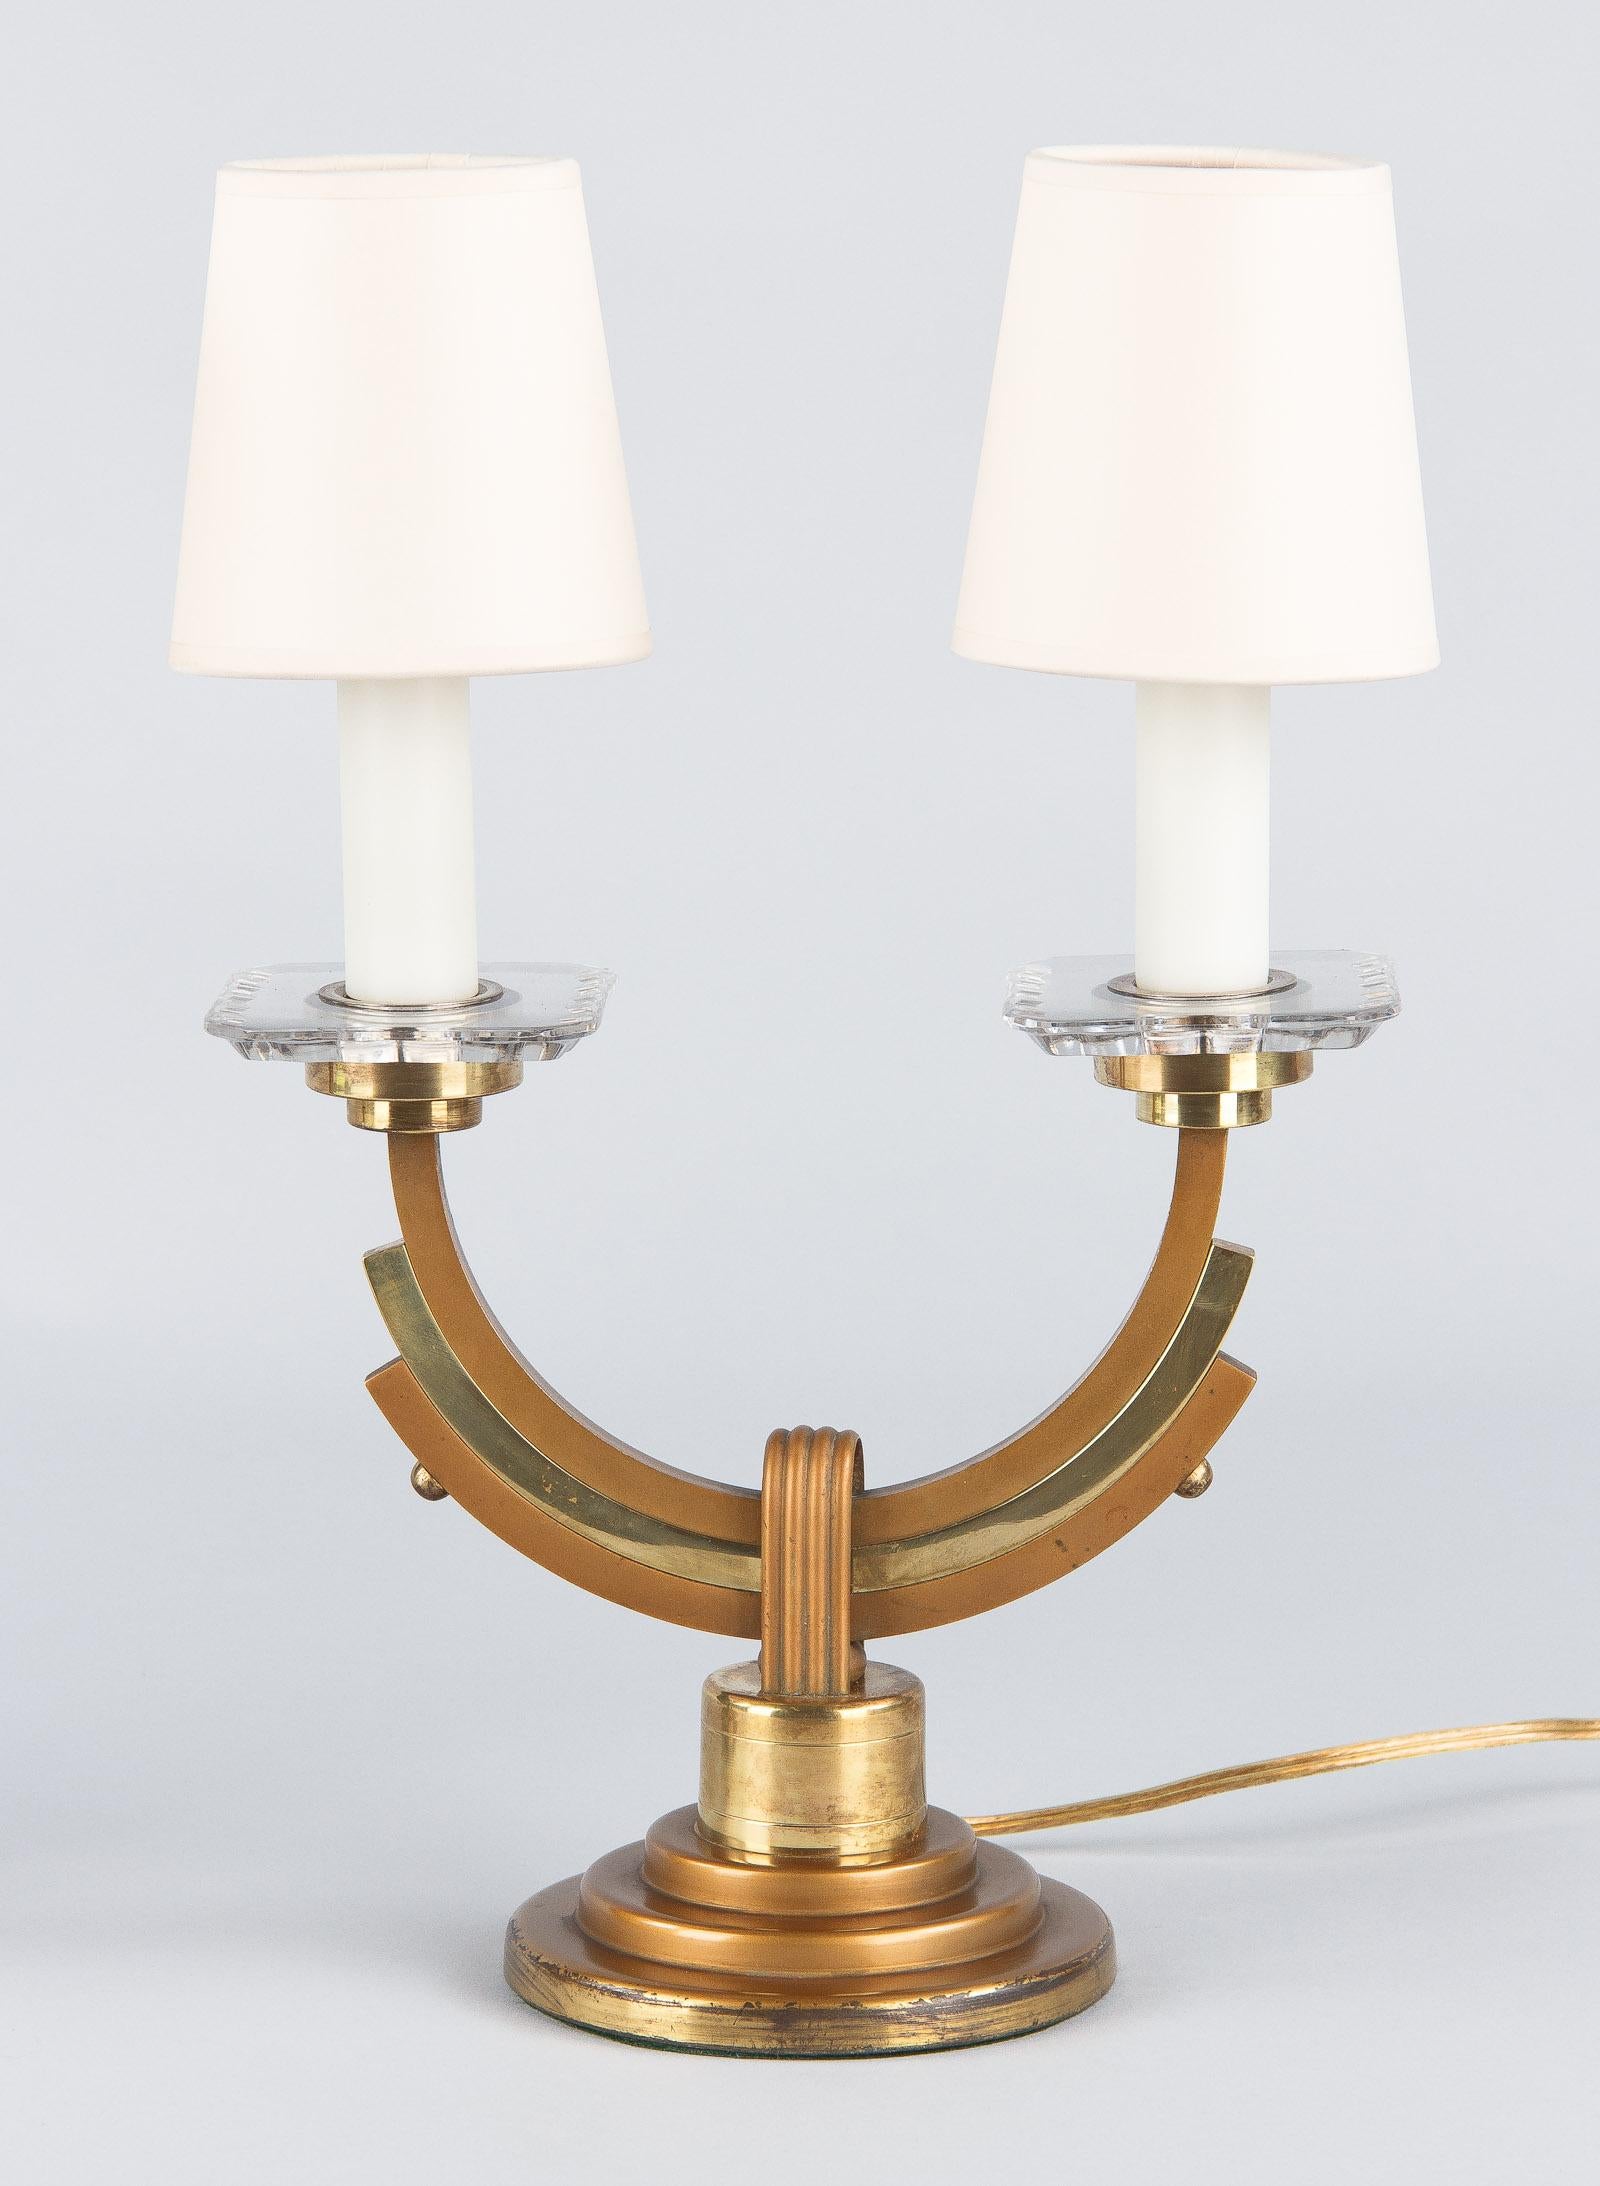 Etched Pair of French Art Deco Brass and Copper Lamps, 1930s